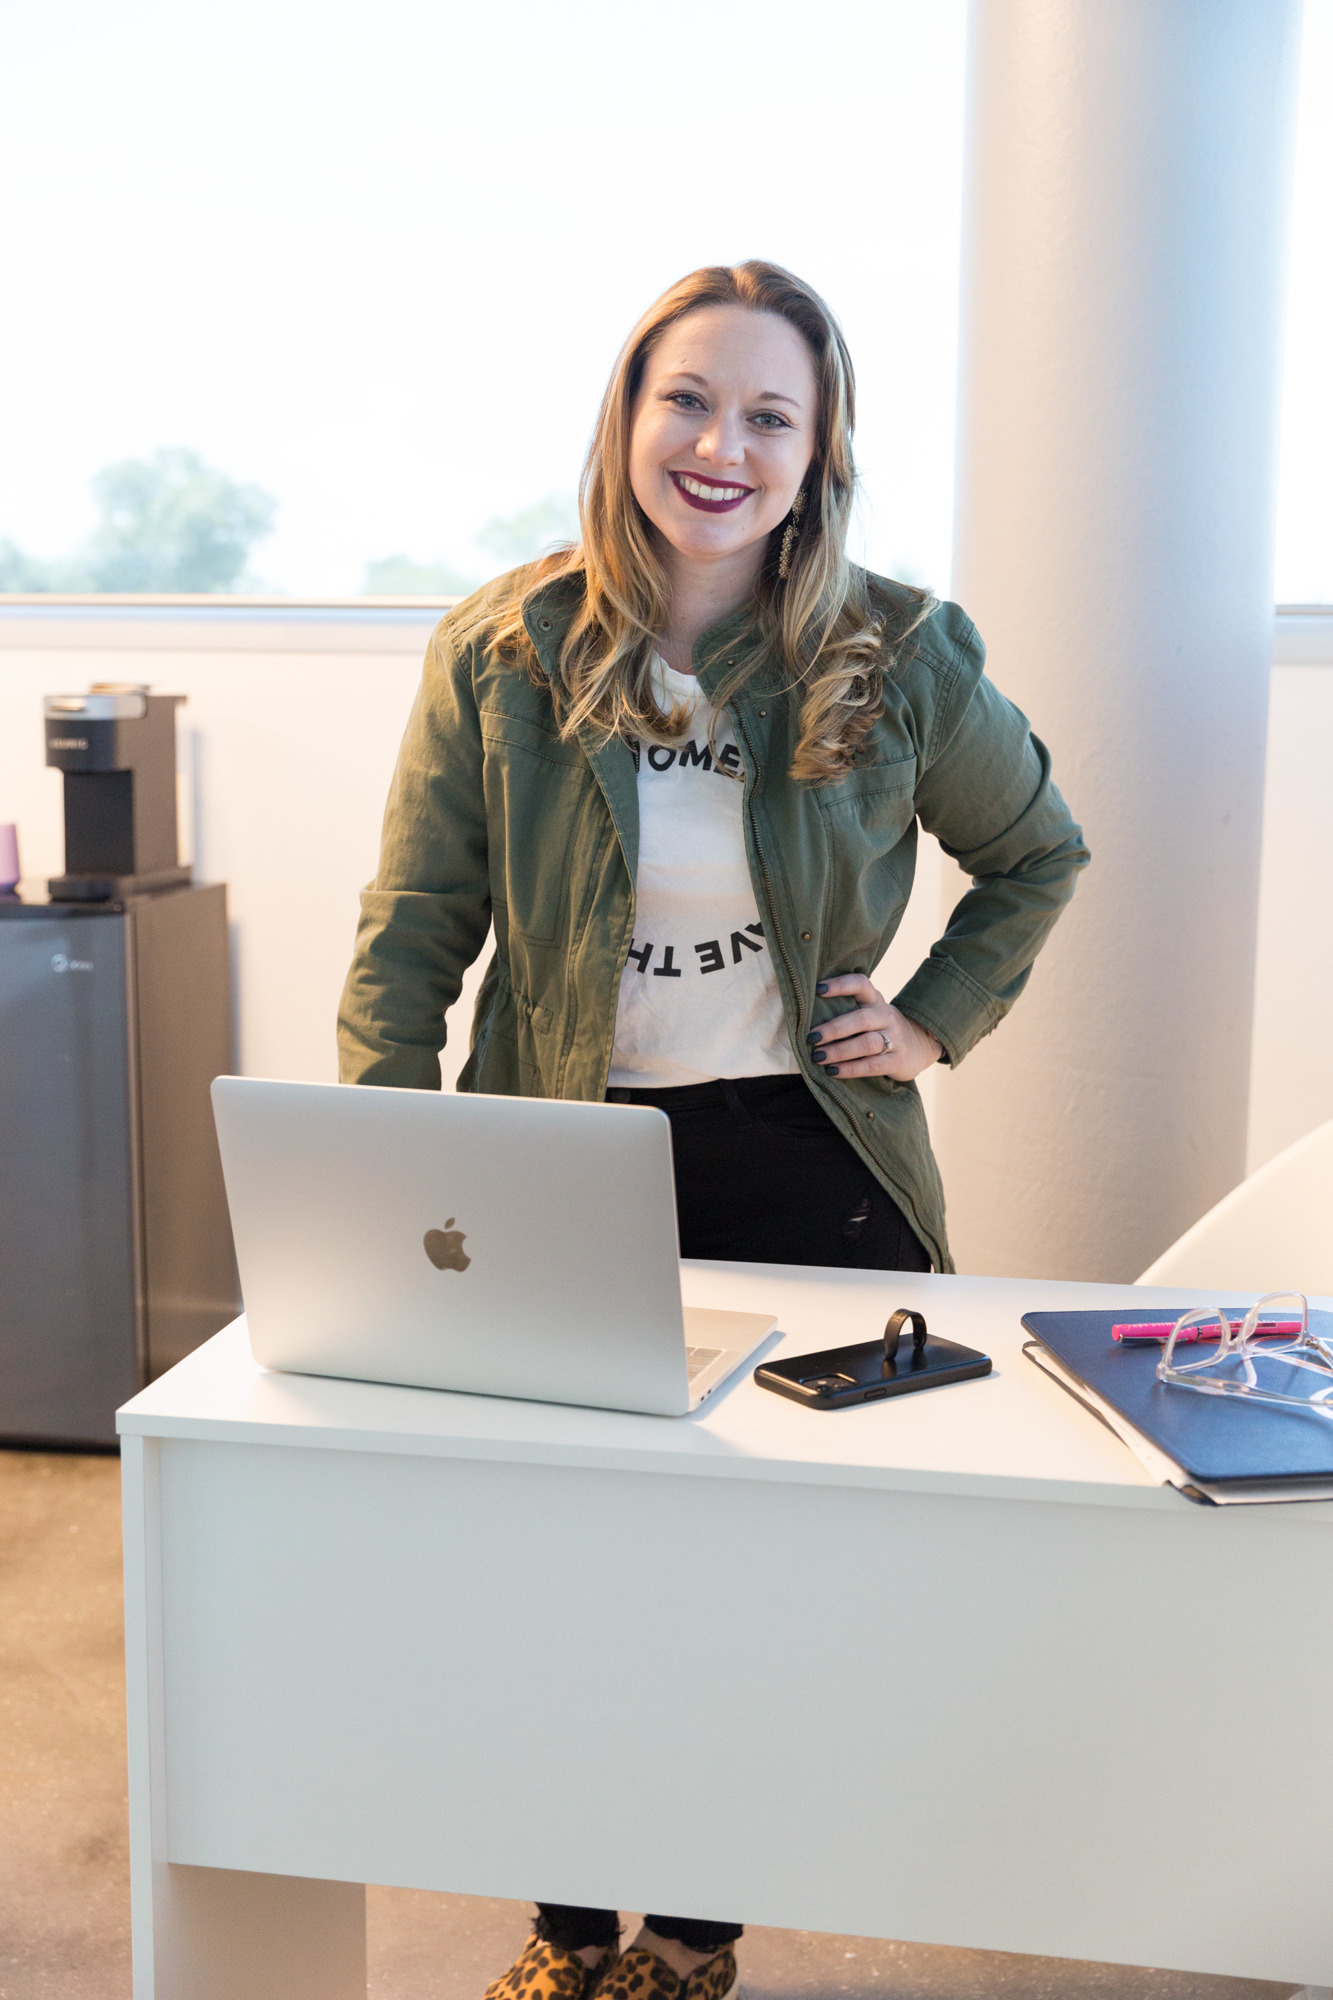 Courtesy. In January 2018, Alyssa Gay founded Alyssa Gay Consulting. The firm offers social media services, along with email marketing, blog writing and search engine optimization.